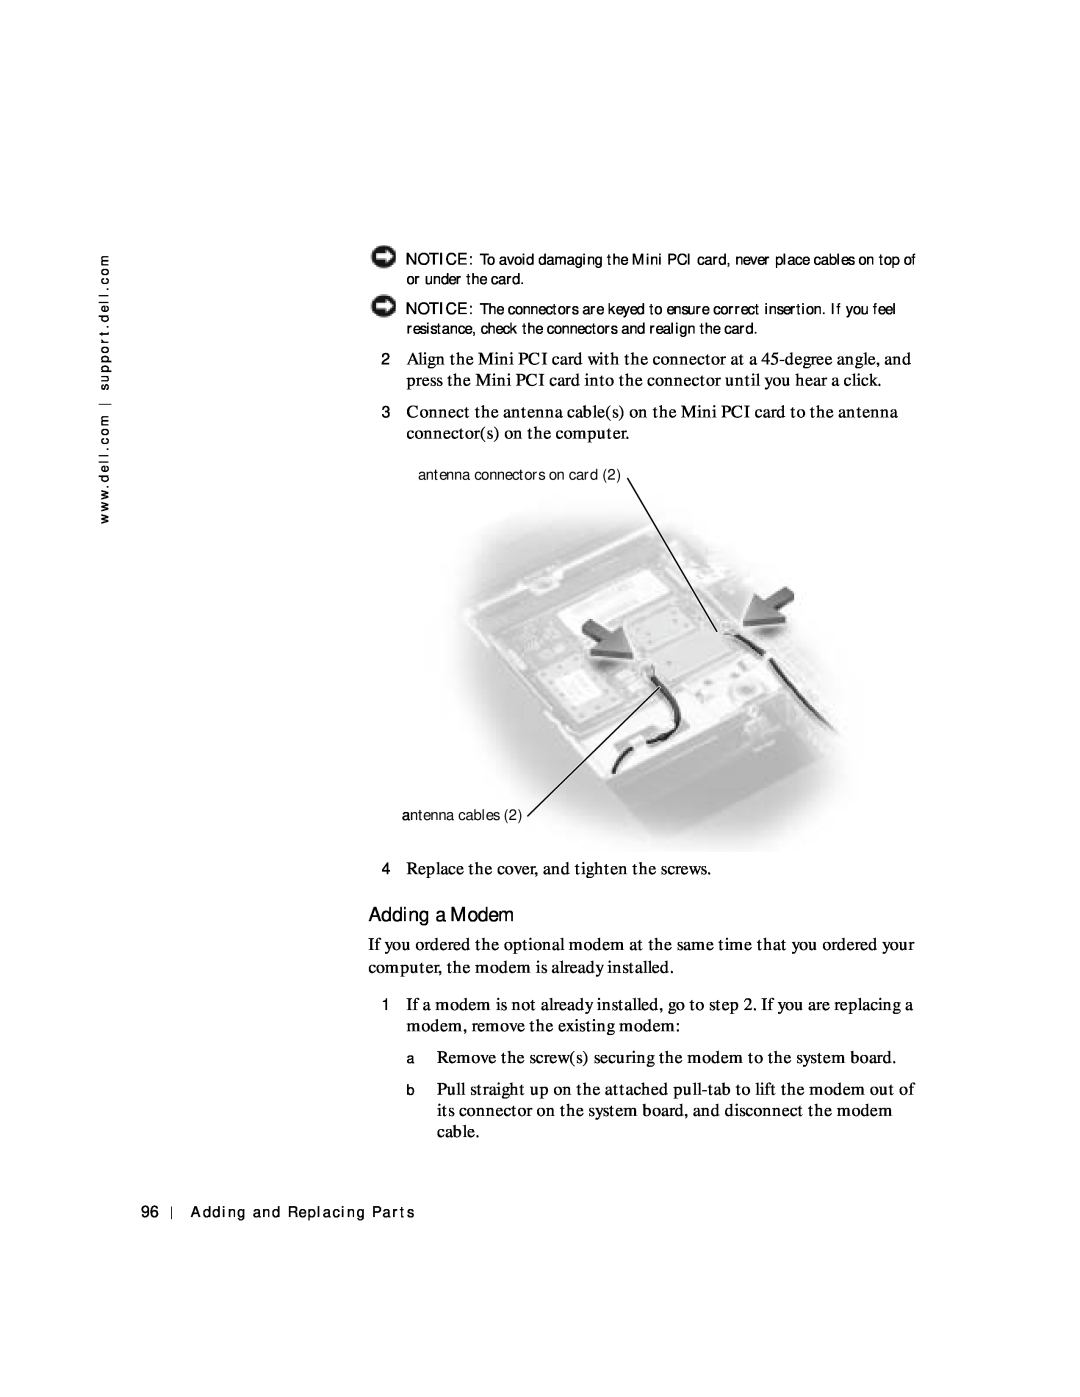 Dell 4150 owner manual Adding a Modem 